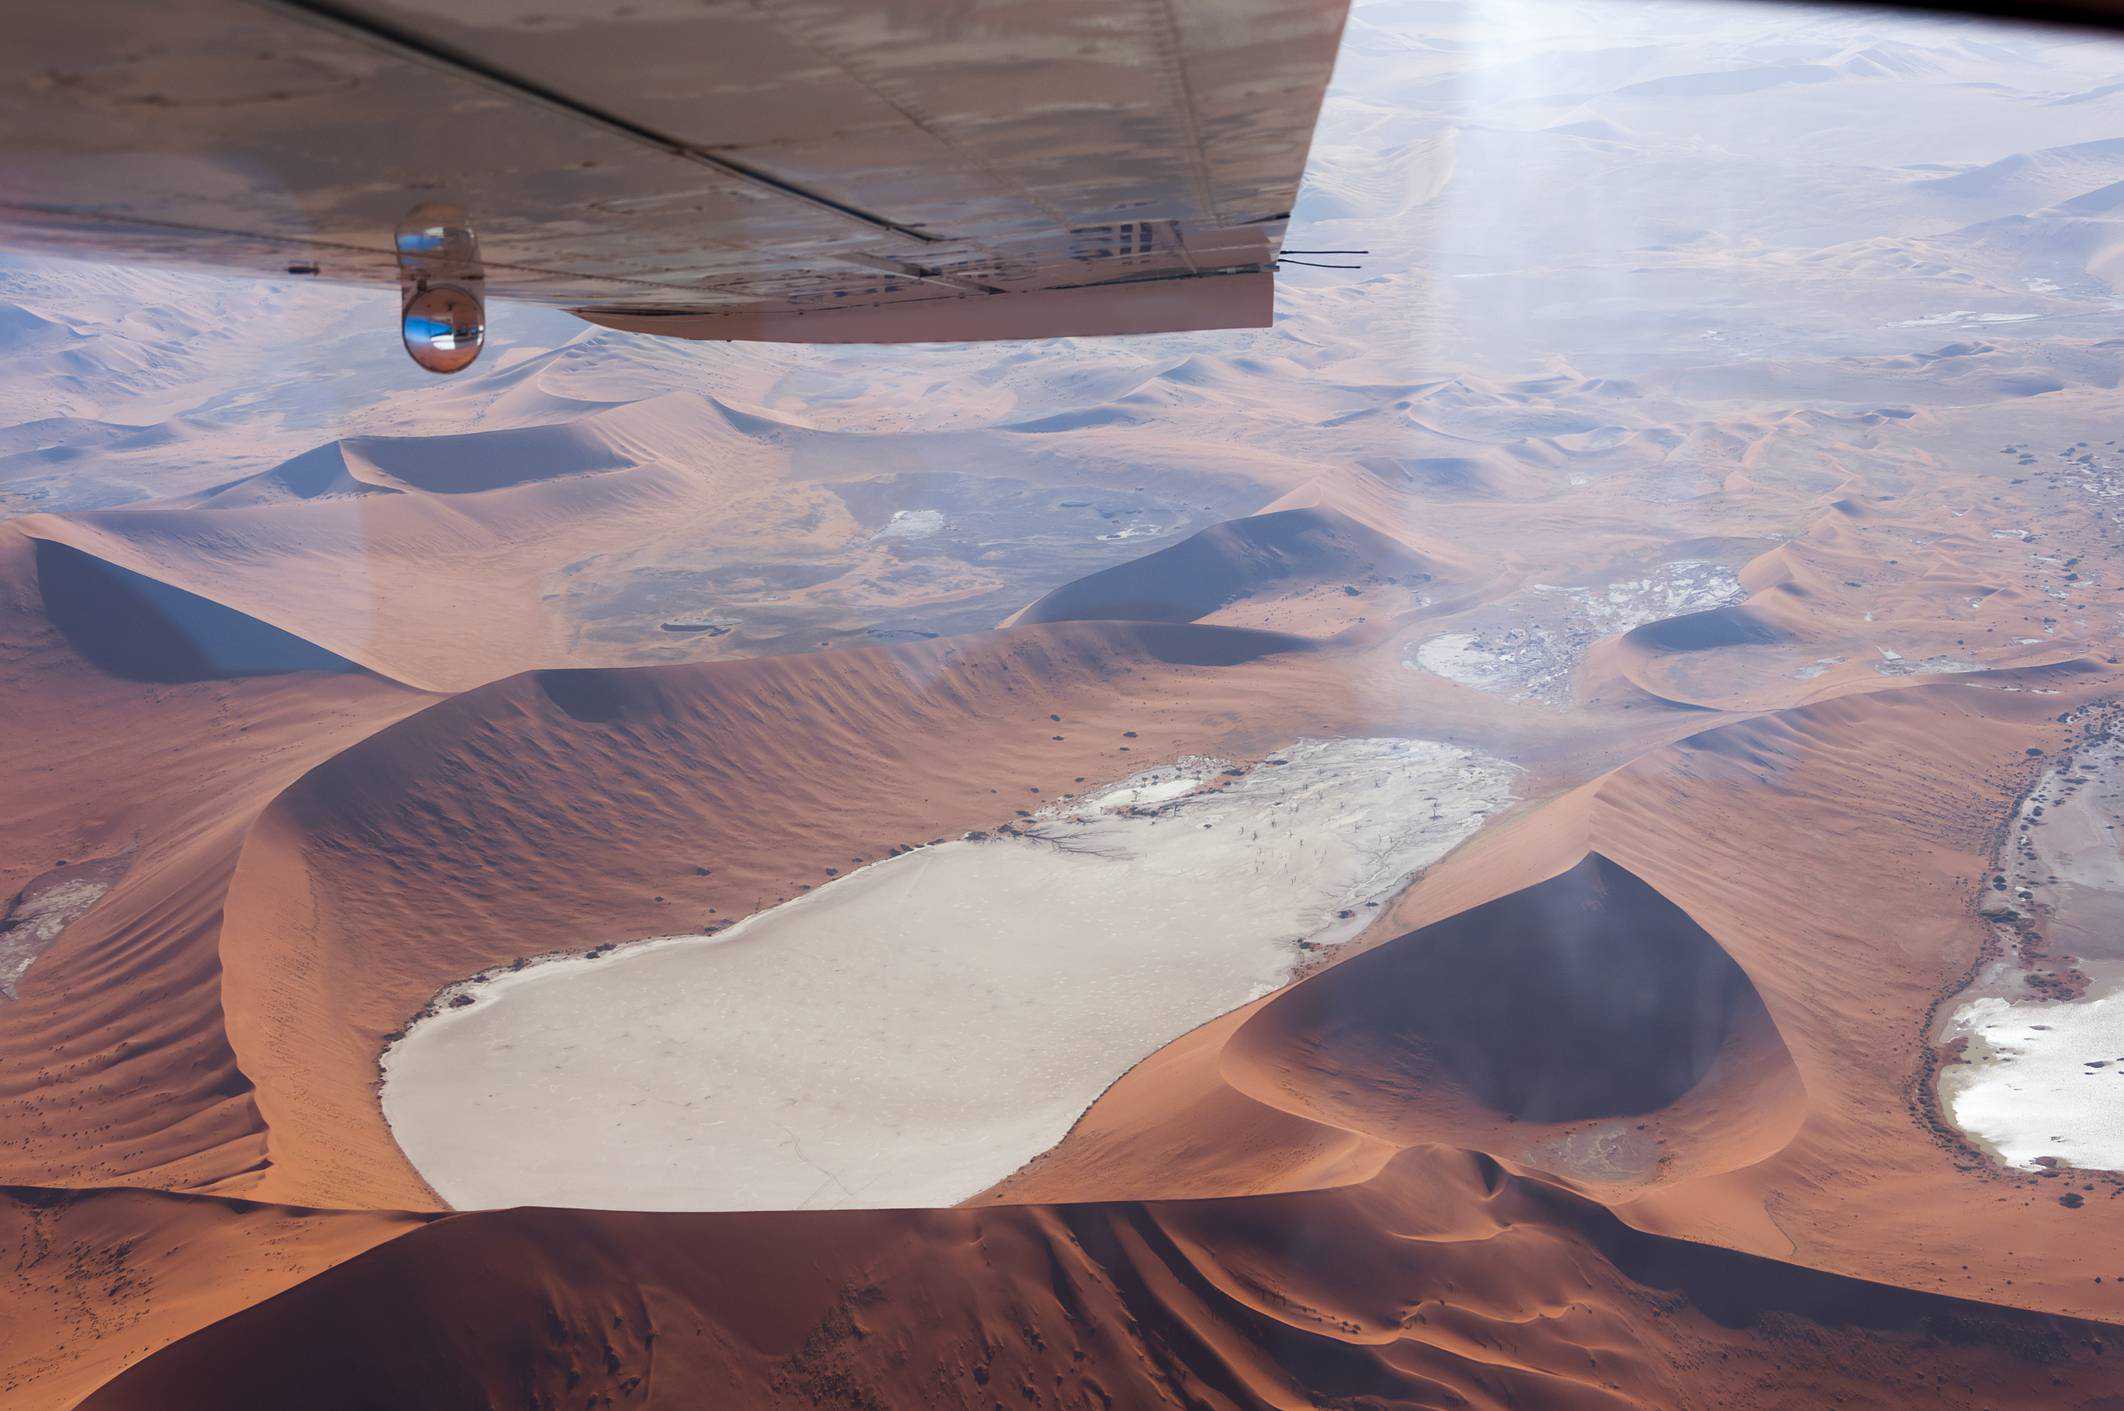 Aerial view of the Dead Vlei, Soussuvlei, in Namibia